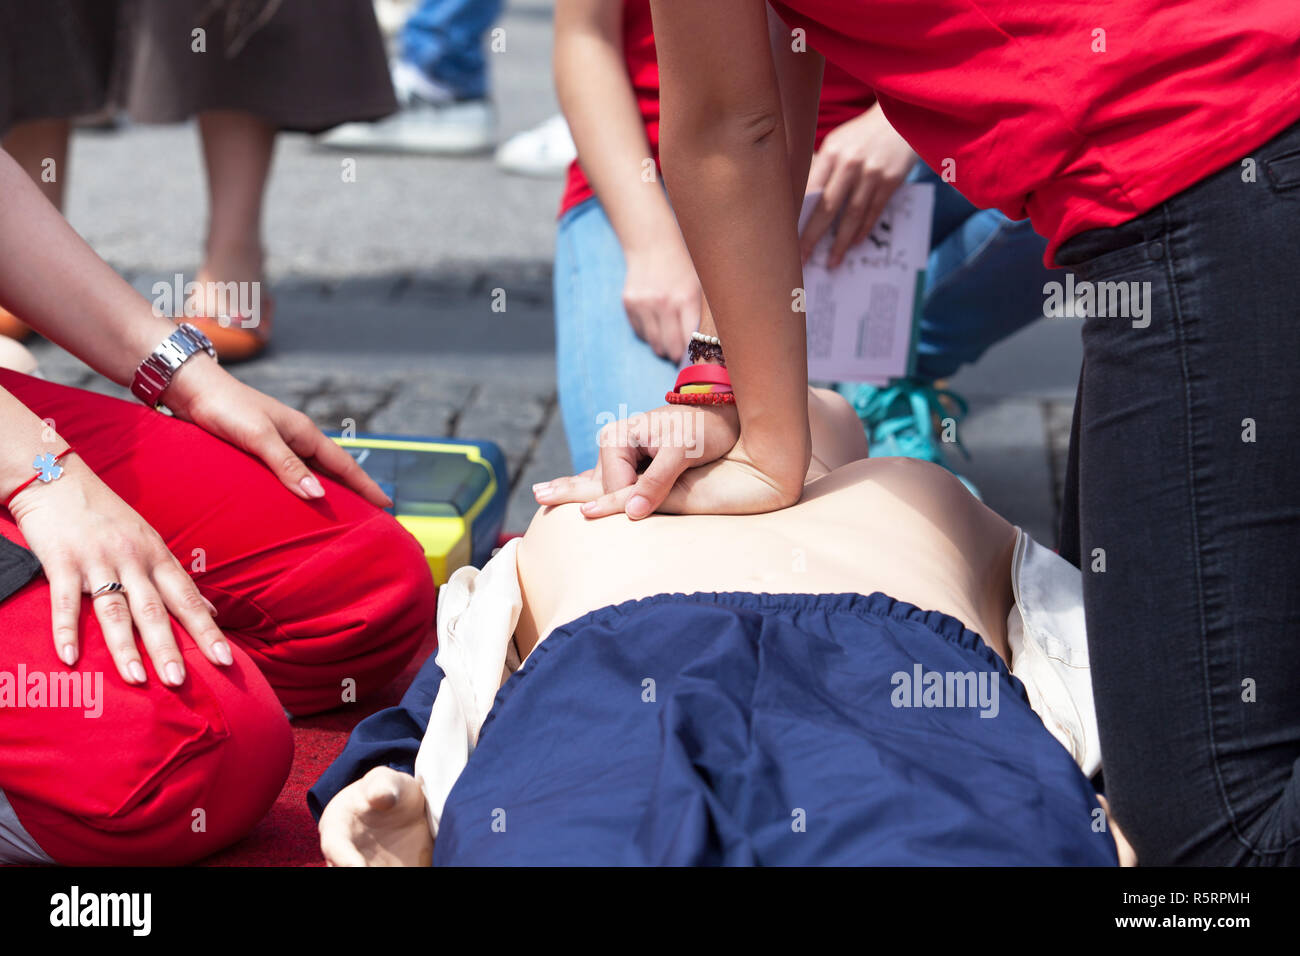 CPR. First aid training. Stock Photo